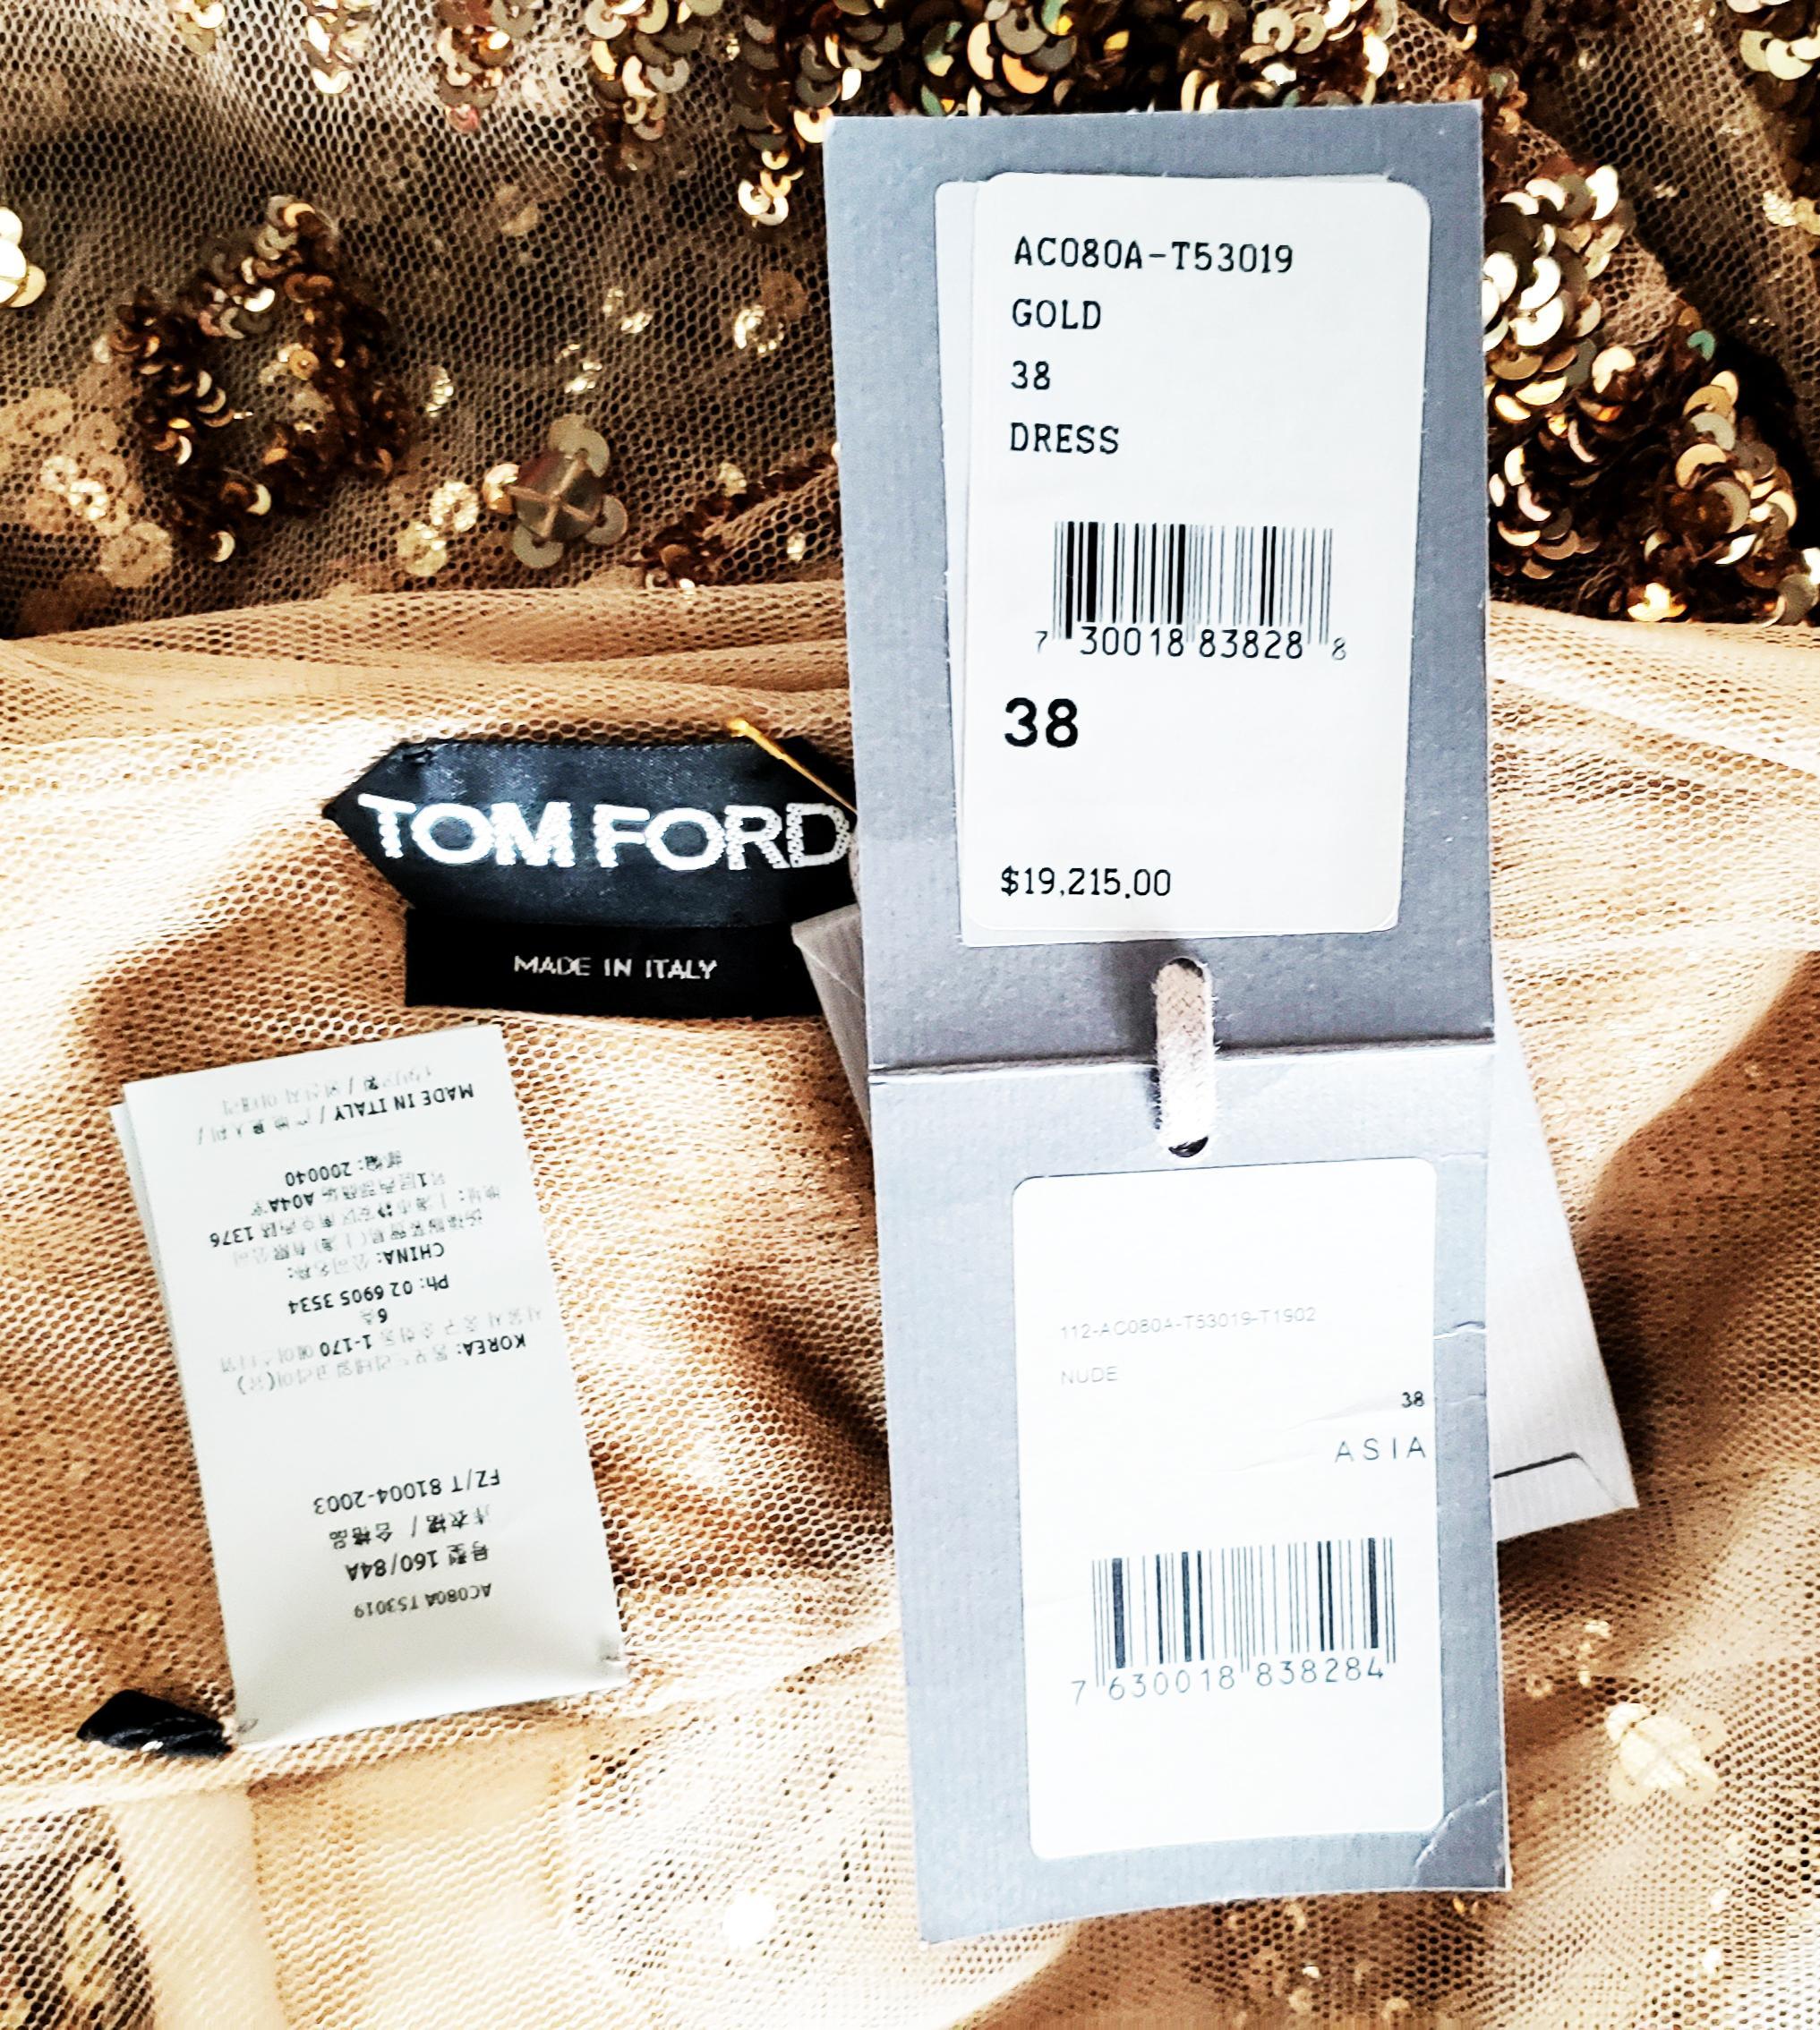 New Tom Ford Nude Embellished Chiffon Dress w/ Gold Sequin Pants 38 - 2 For Sale 8